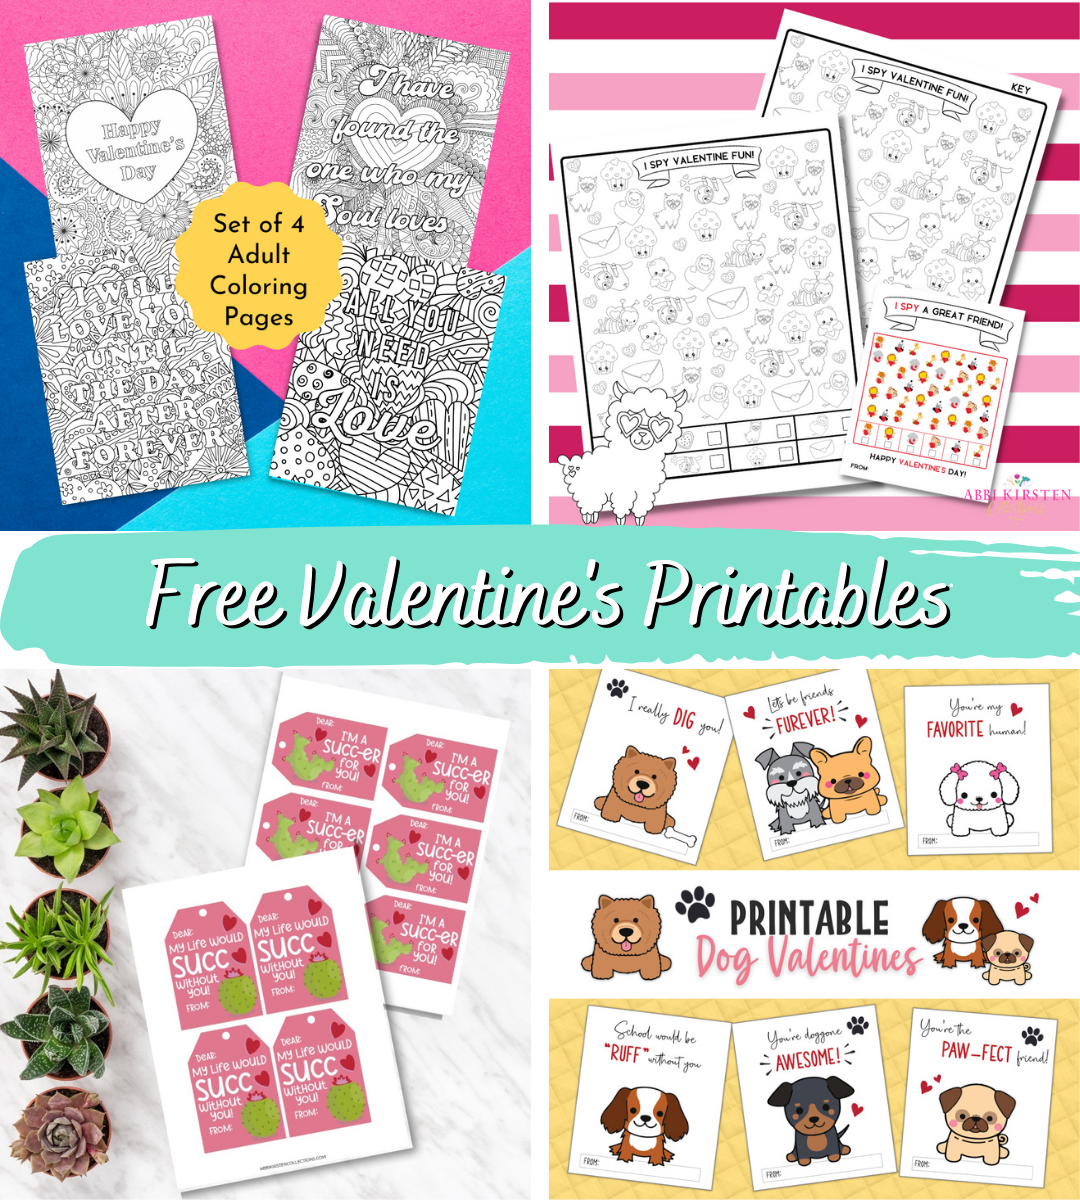 12 Adorable Free Valentine’s Printables for Kids and Adults